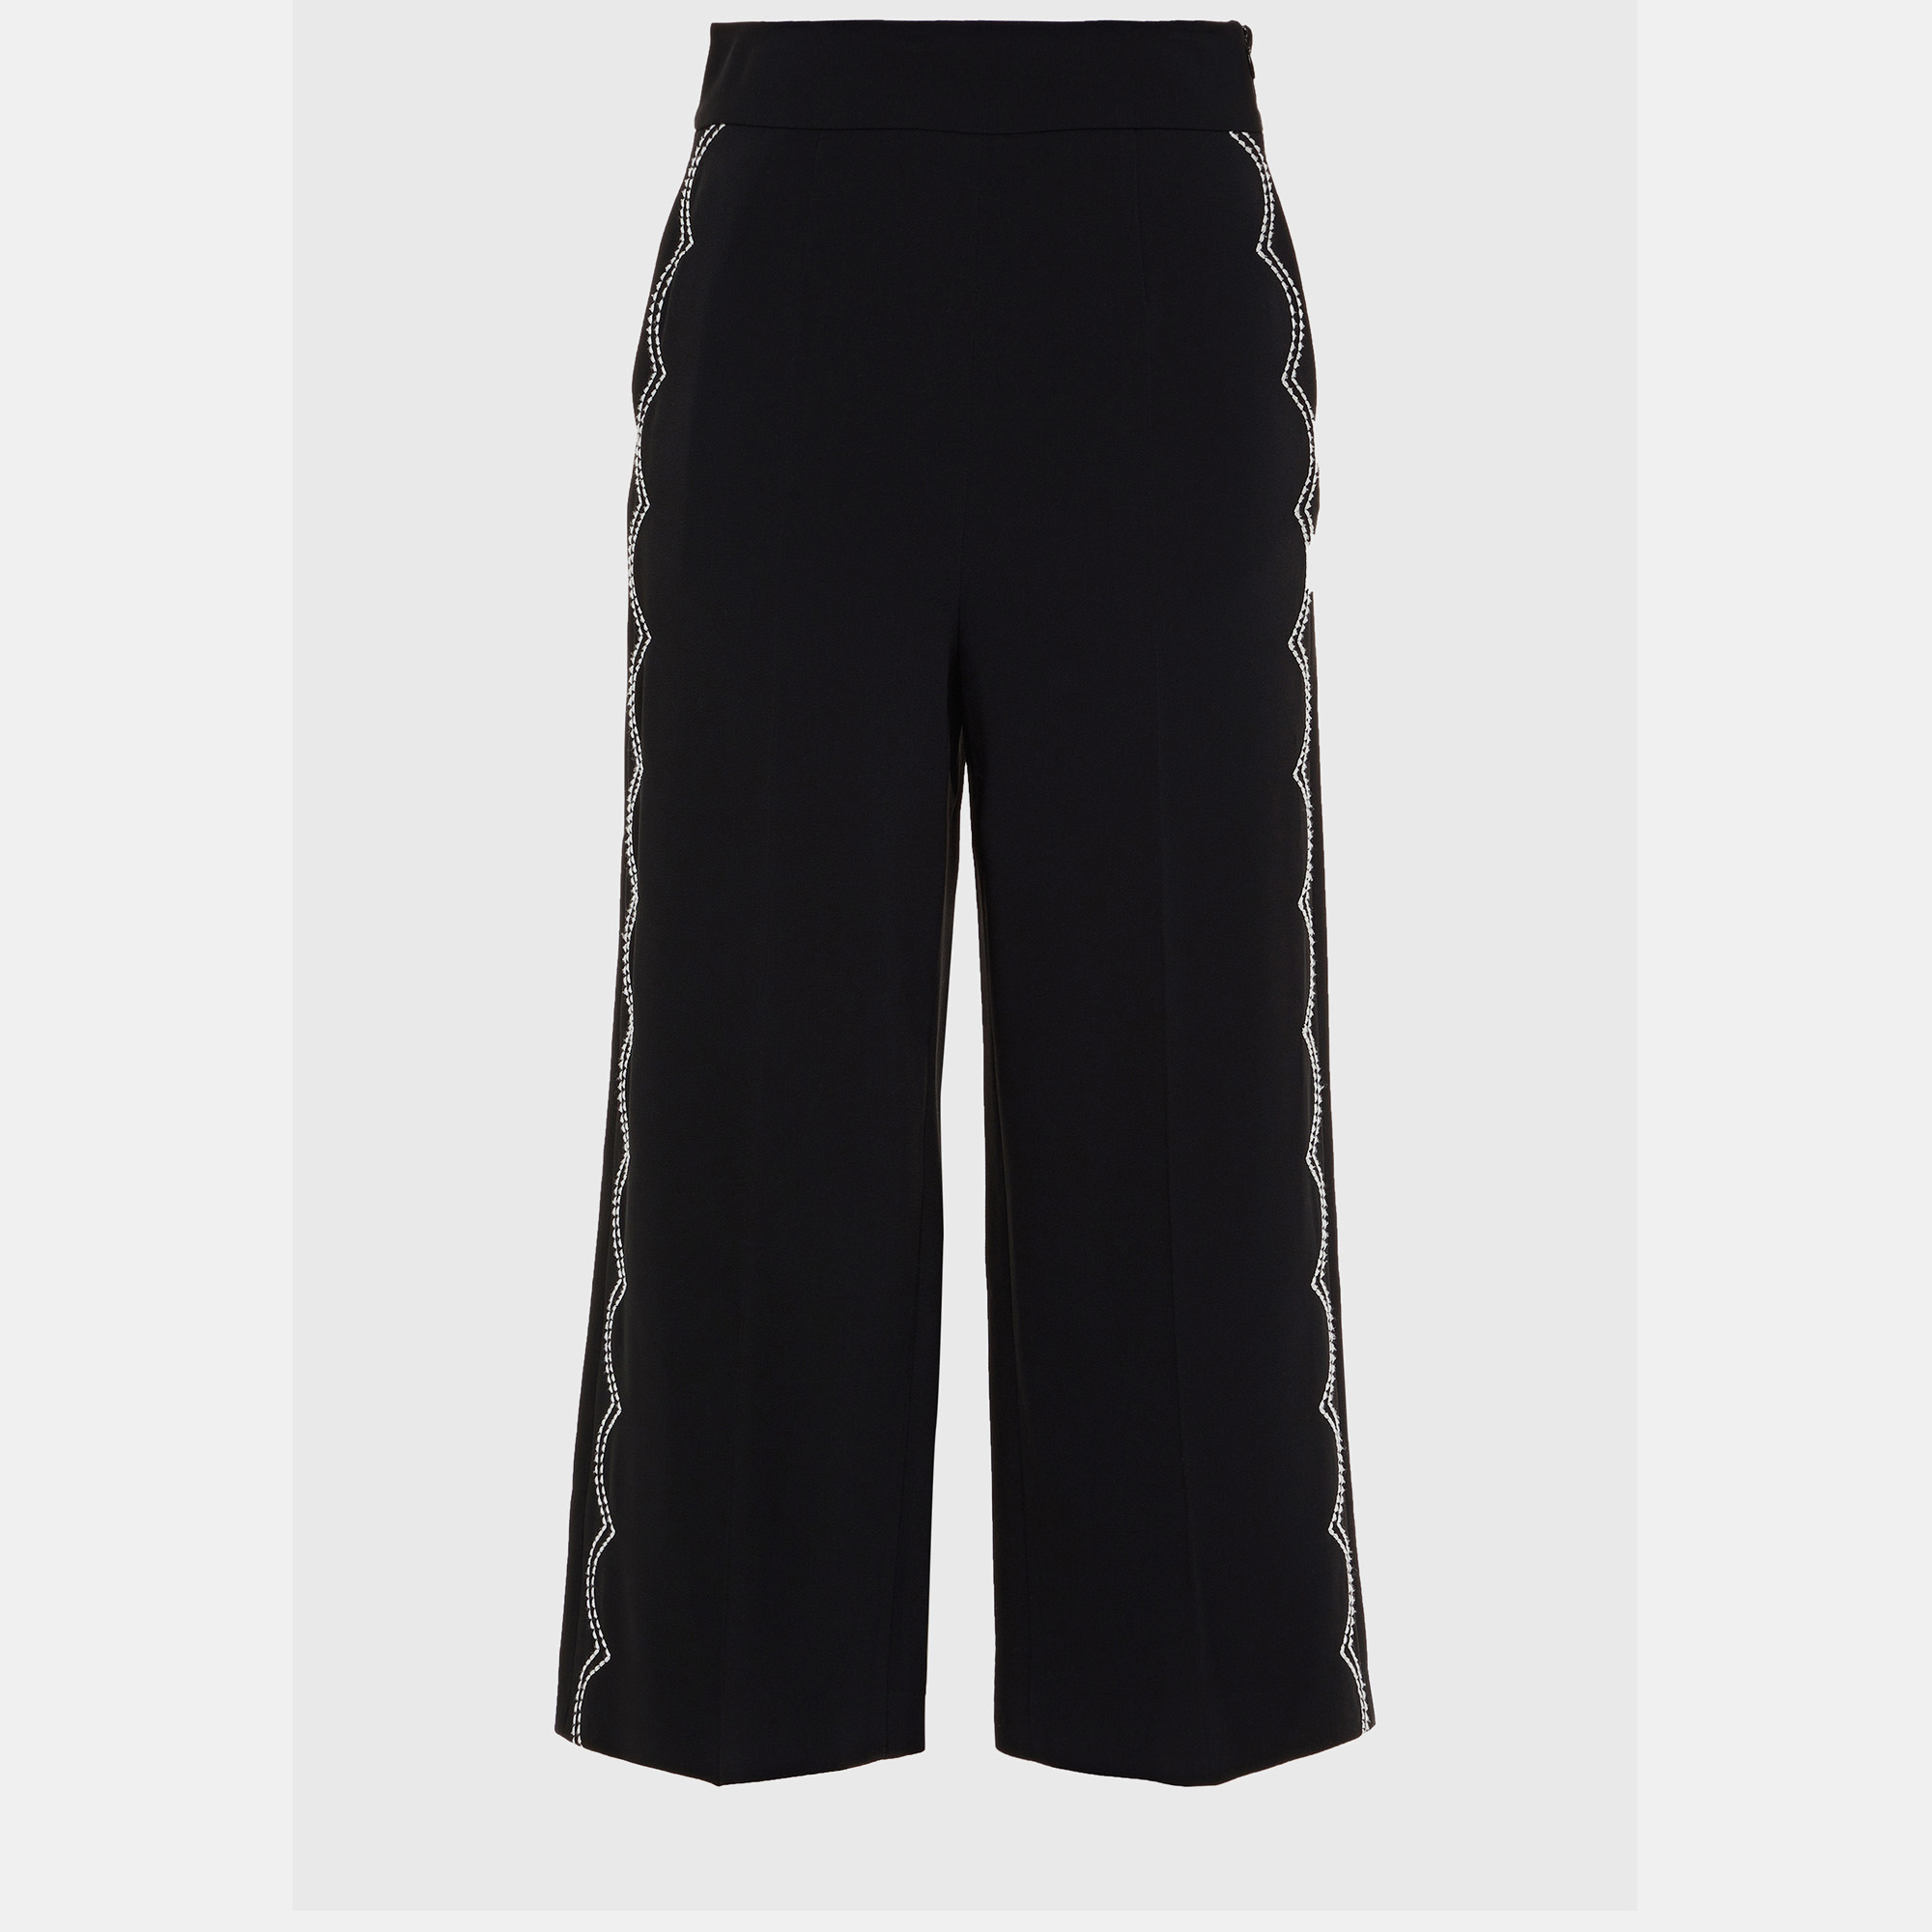 Pre-owned Red Valentino Black Crepe Culottes S (it 40)